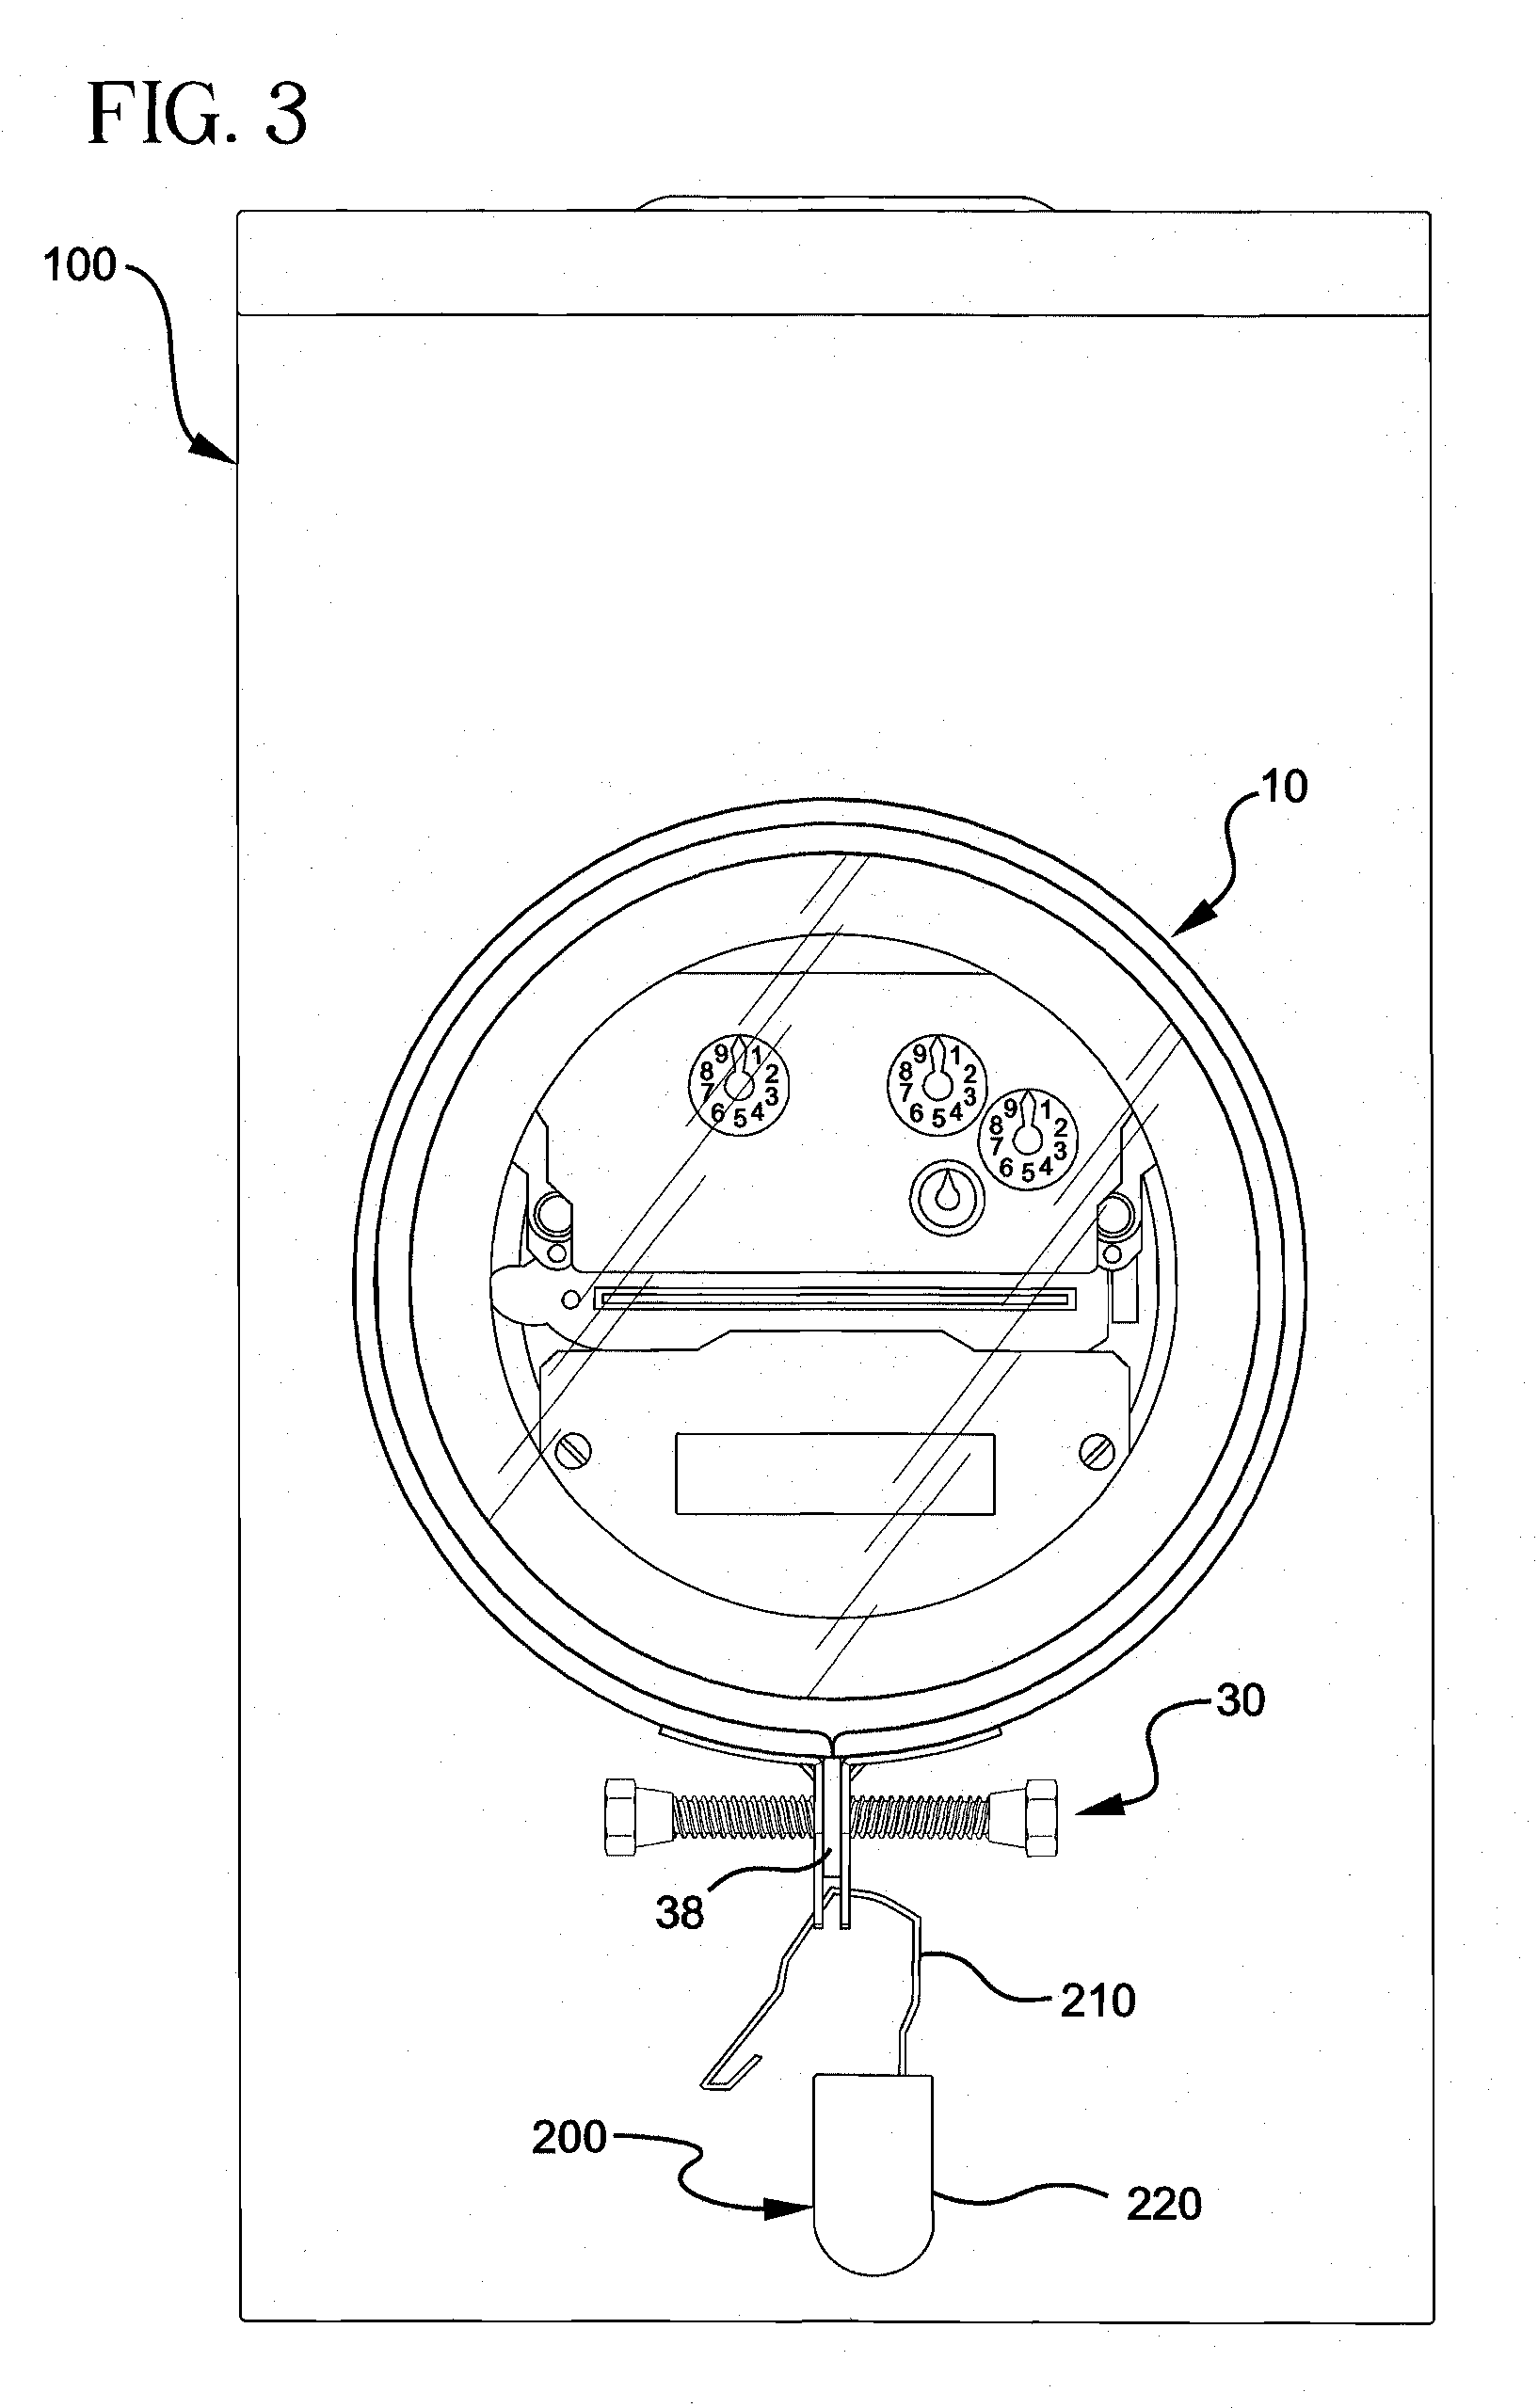 Sealing ring with improved fastener